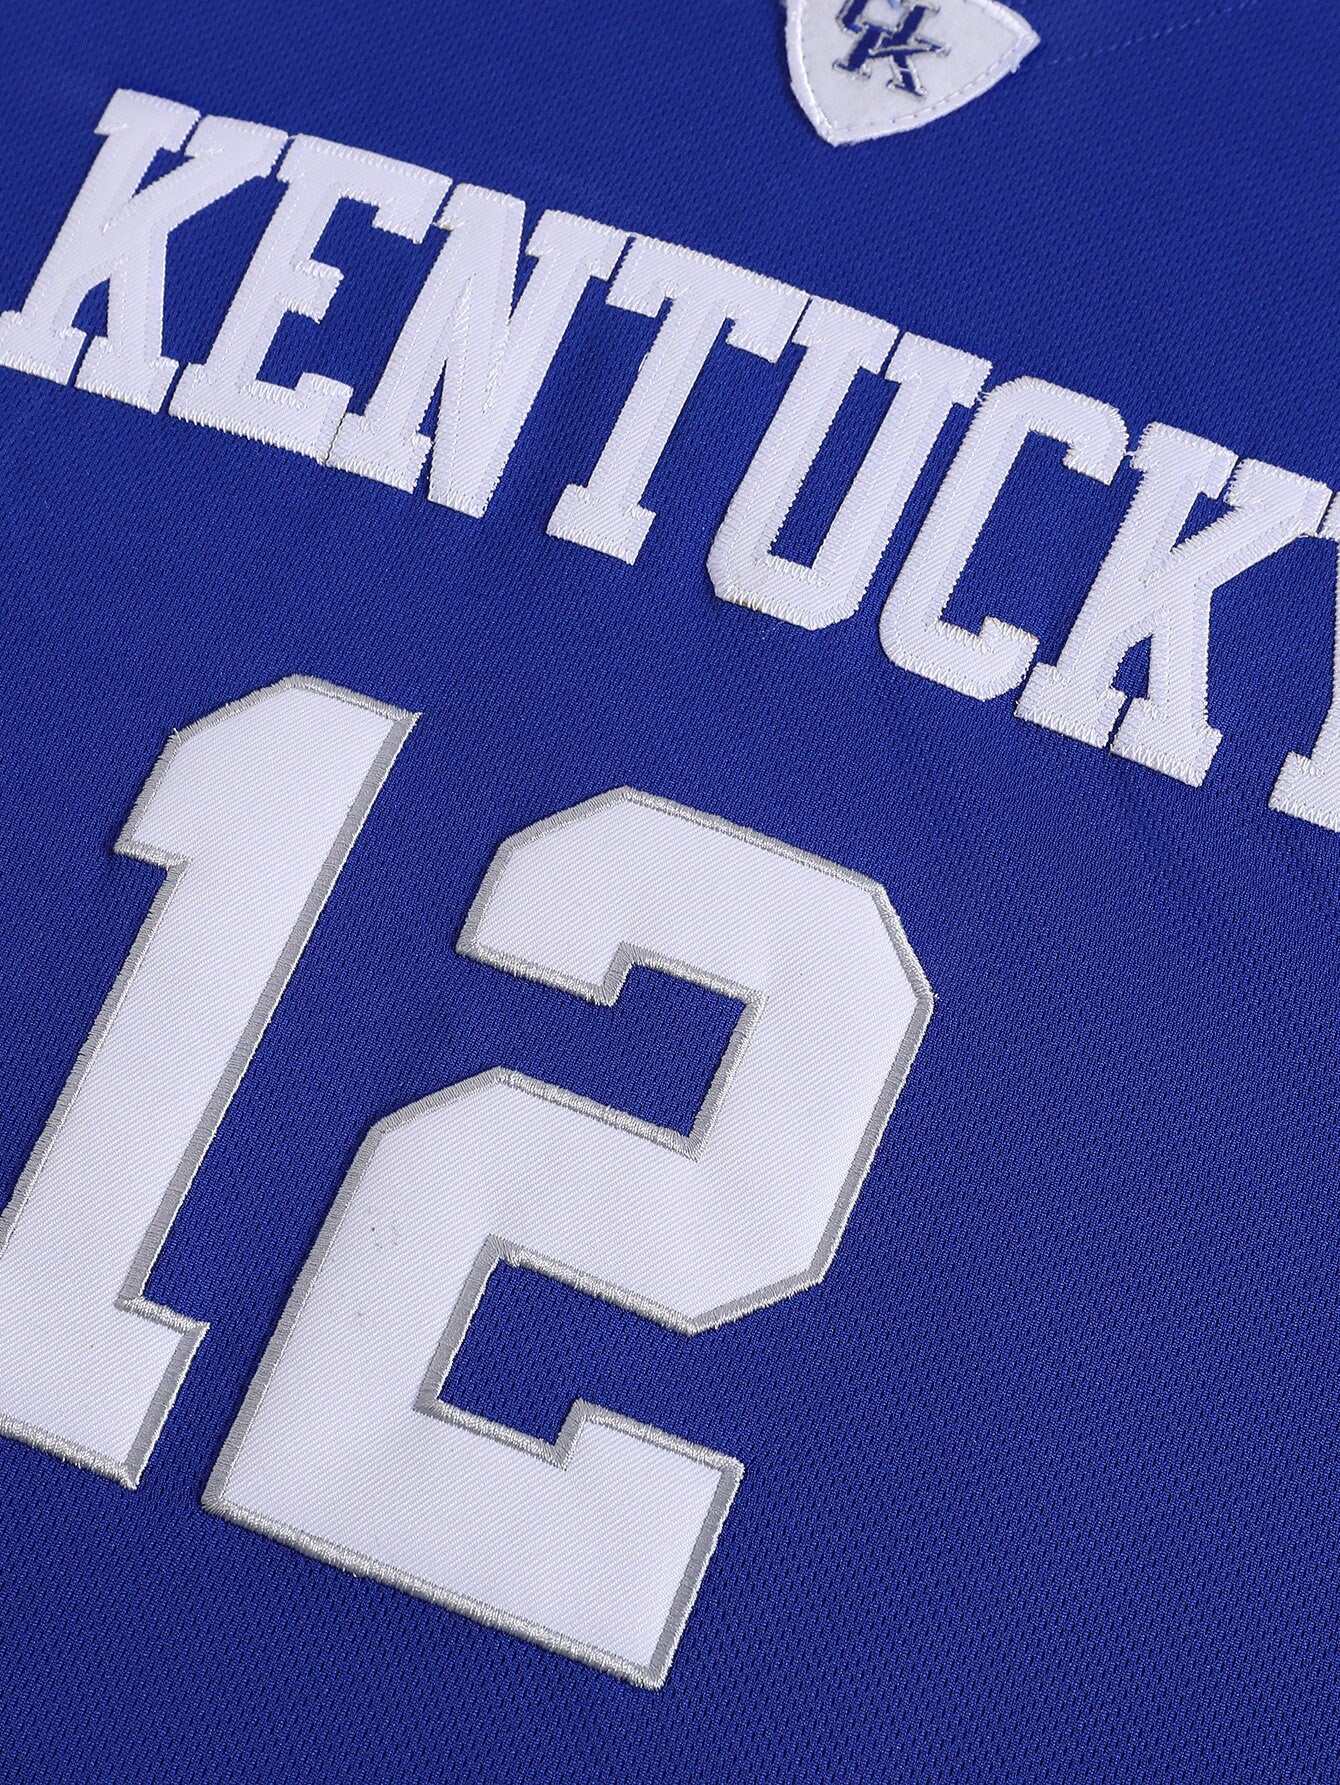 Karl Anthony Towns Kentucky Basketball Jersey College